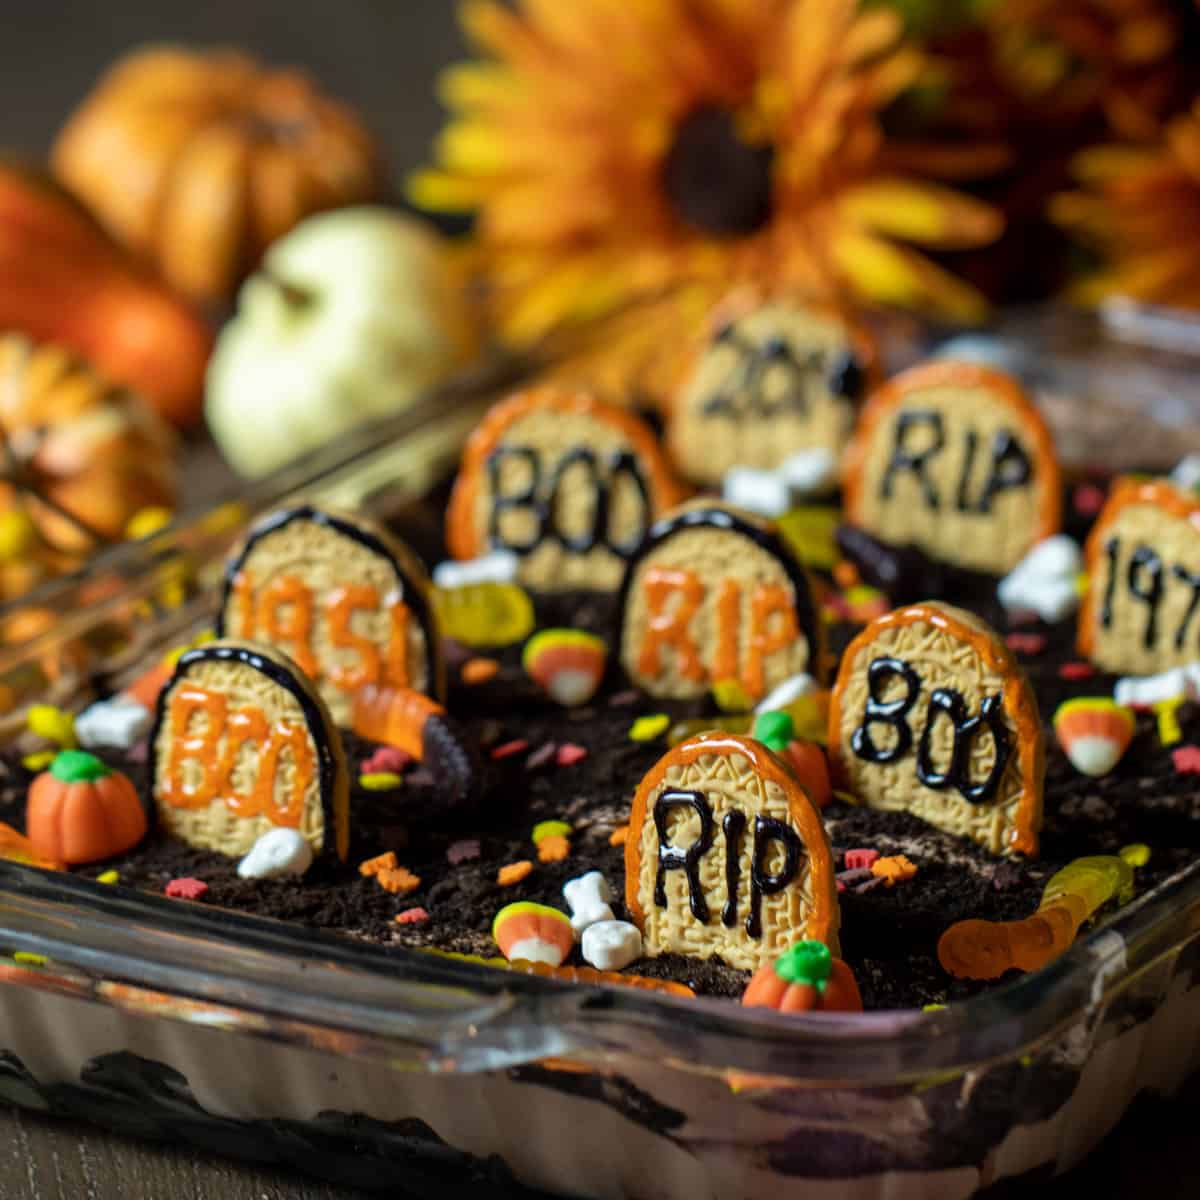 A dessert made for halloween that looks like a cemetery.